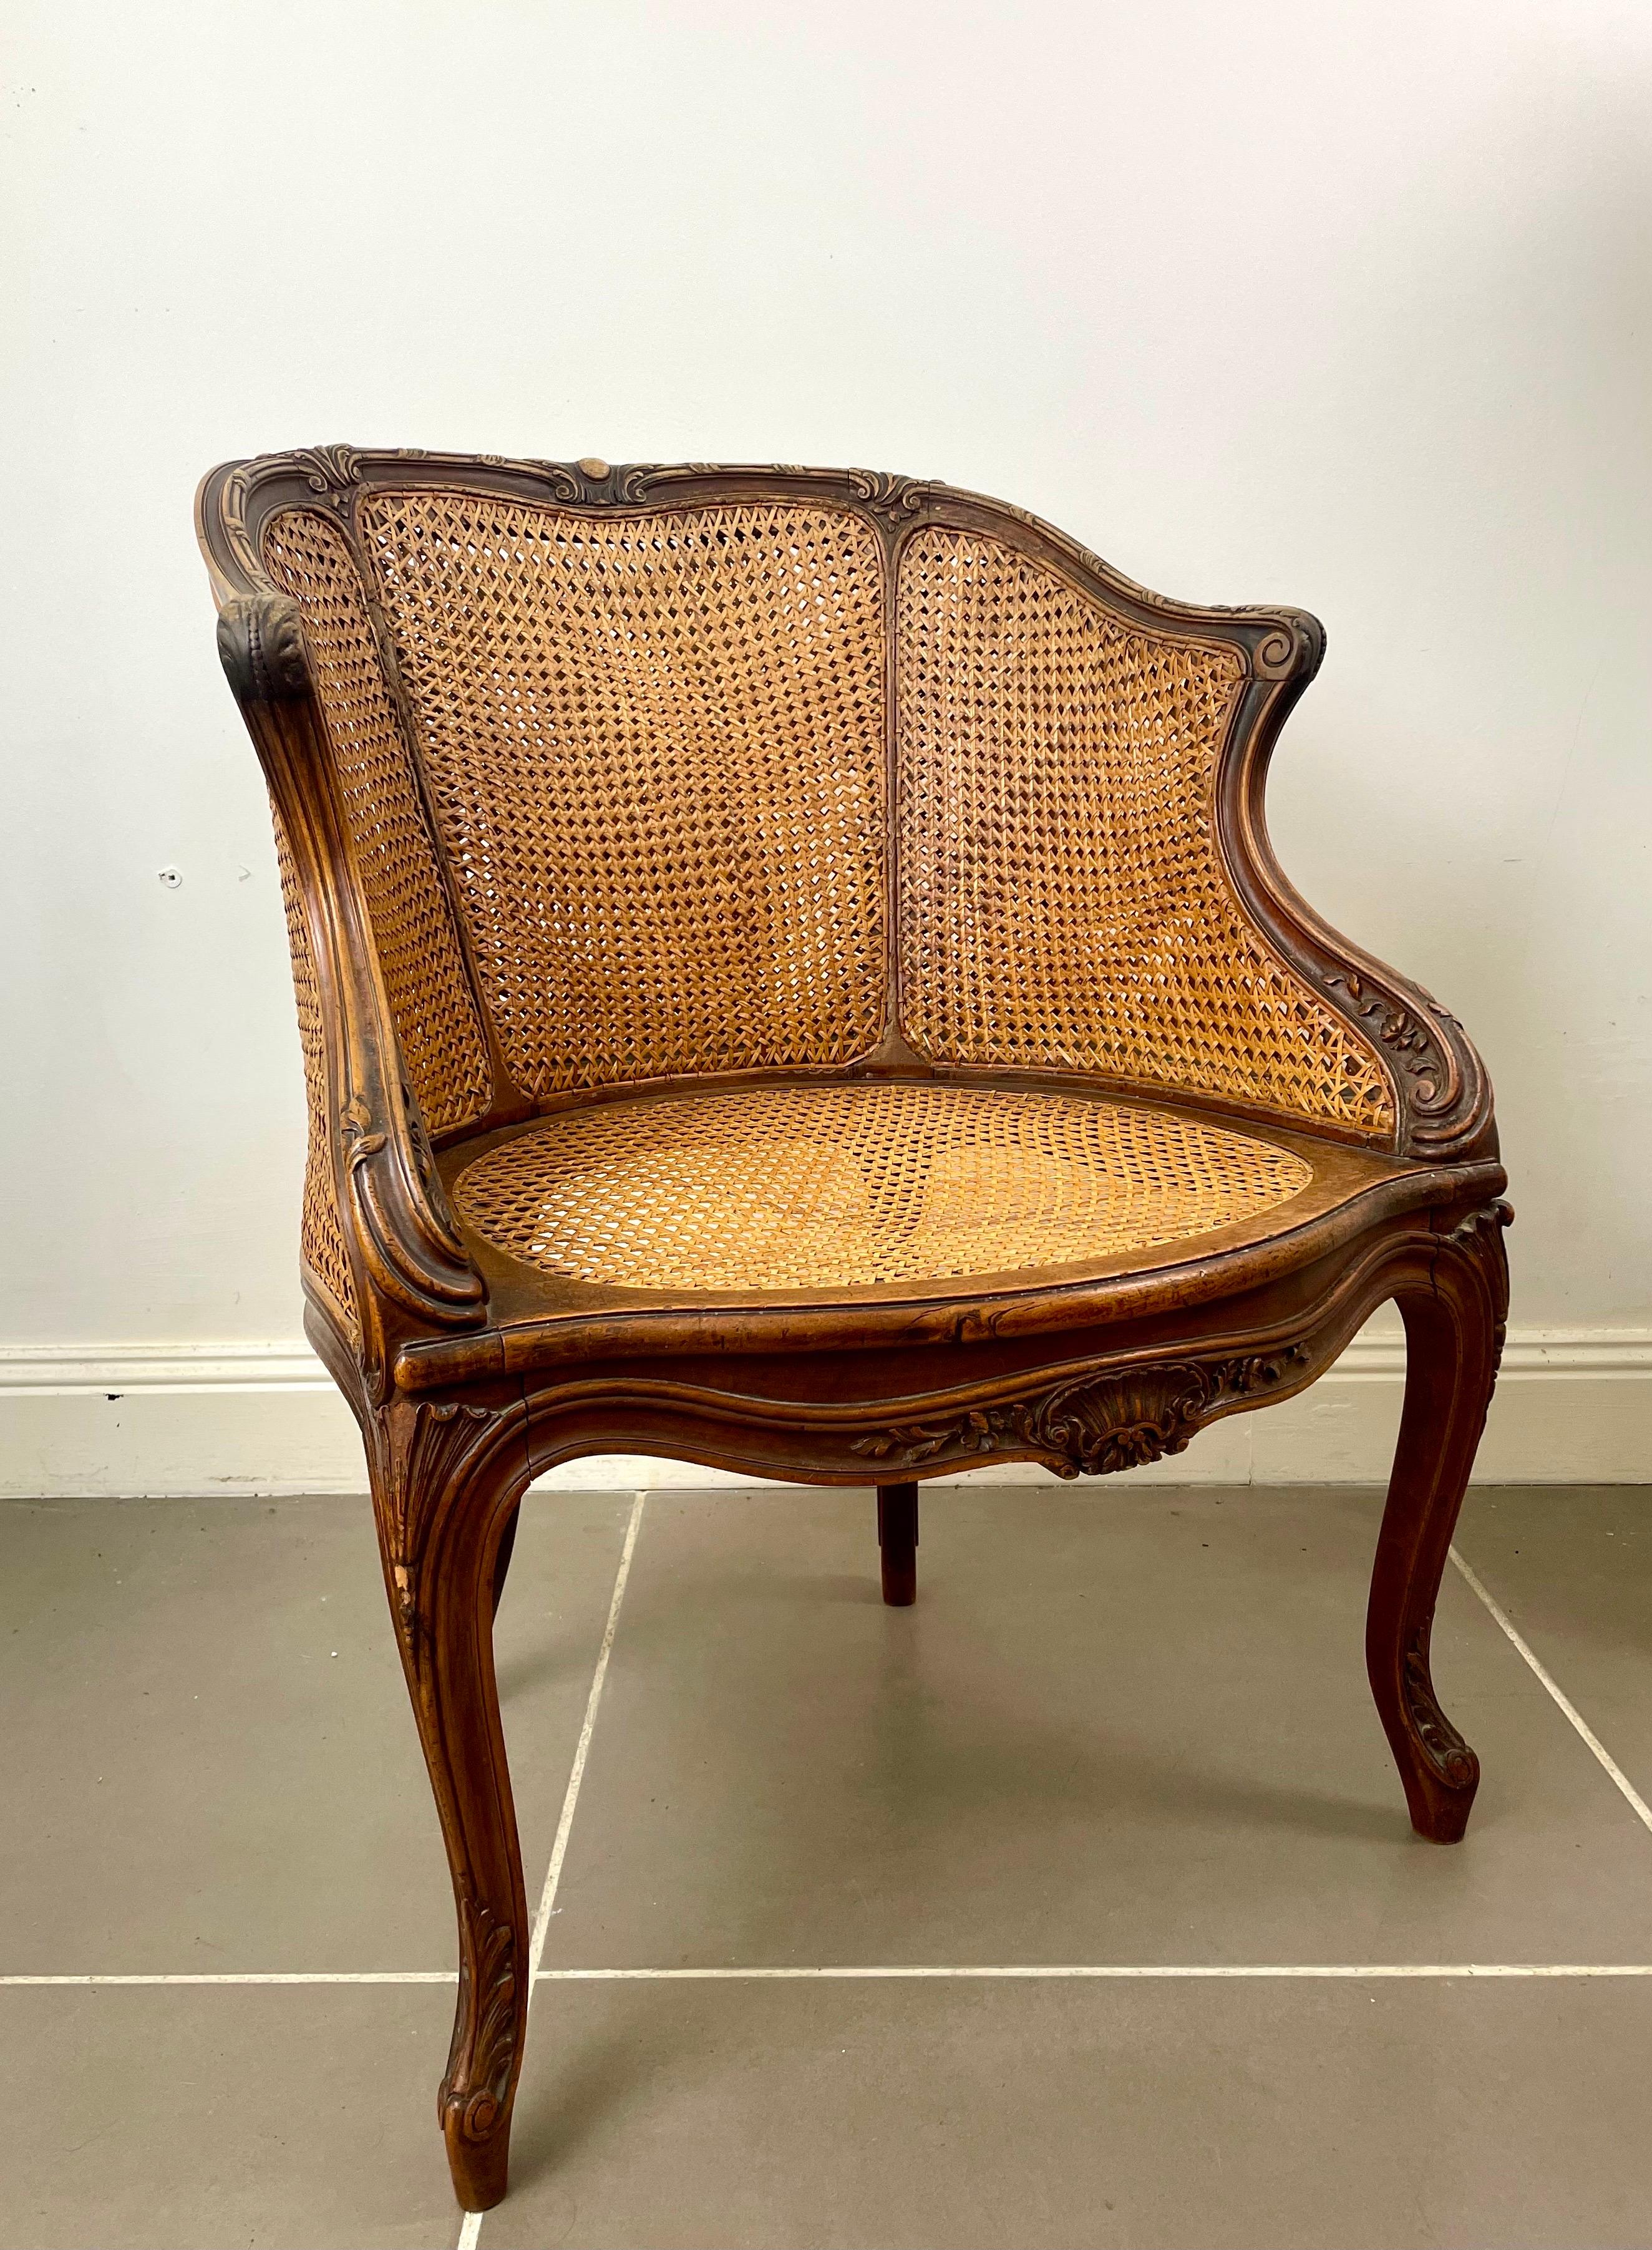 Magnificent bergere office armchair with cane bottom in Louis XV style dating from the 19th century, elegantly molded.
This armchair is in patinated wood and its shape is typical of the Louis XV style.
The seat and the backrest are caned.
The